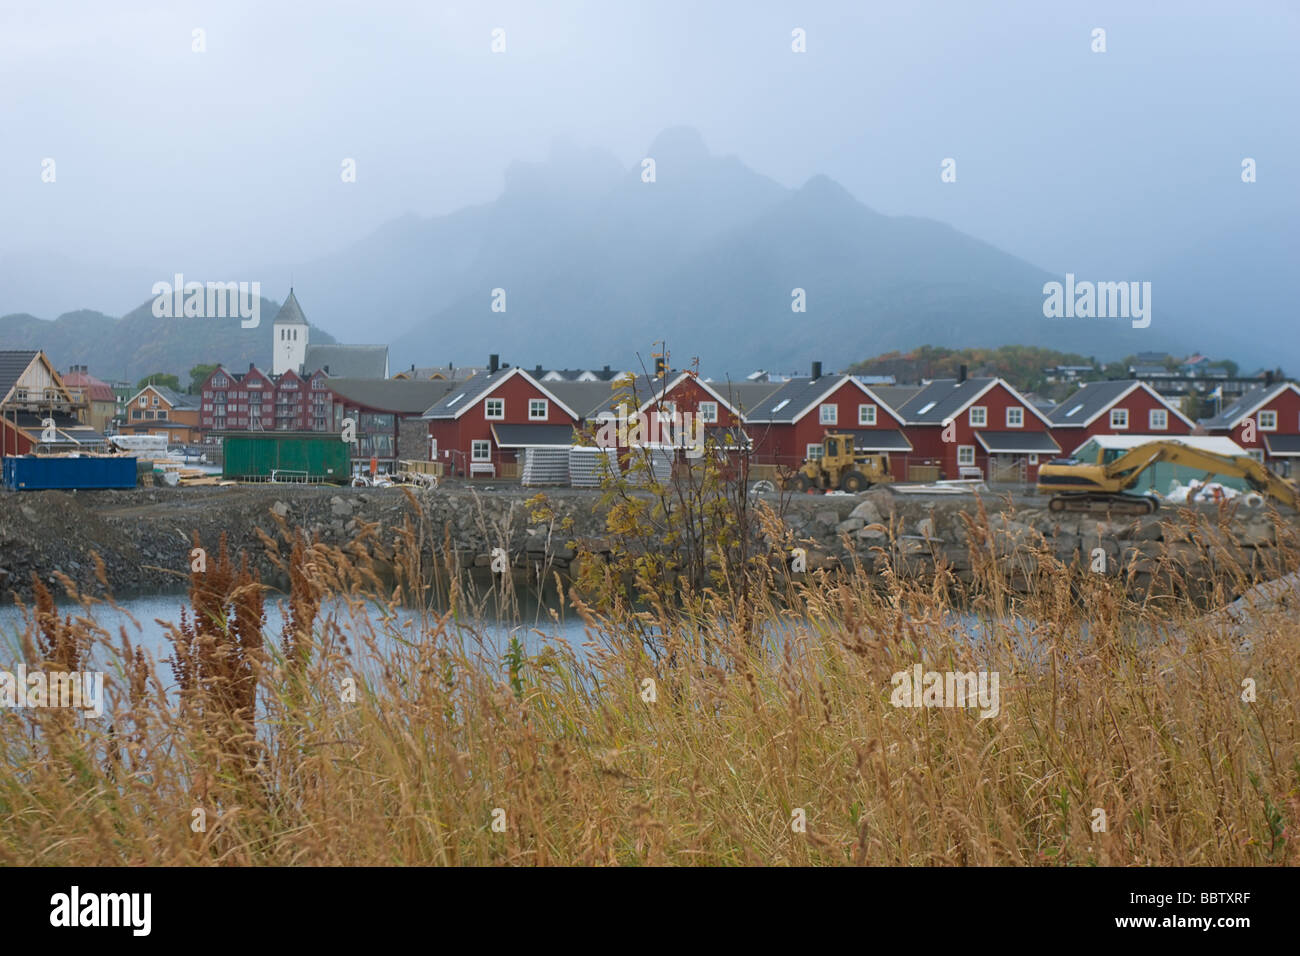 Line of red houses on grassy coast lake Stock Photo